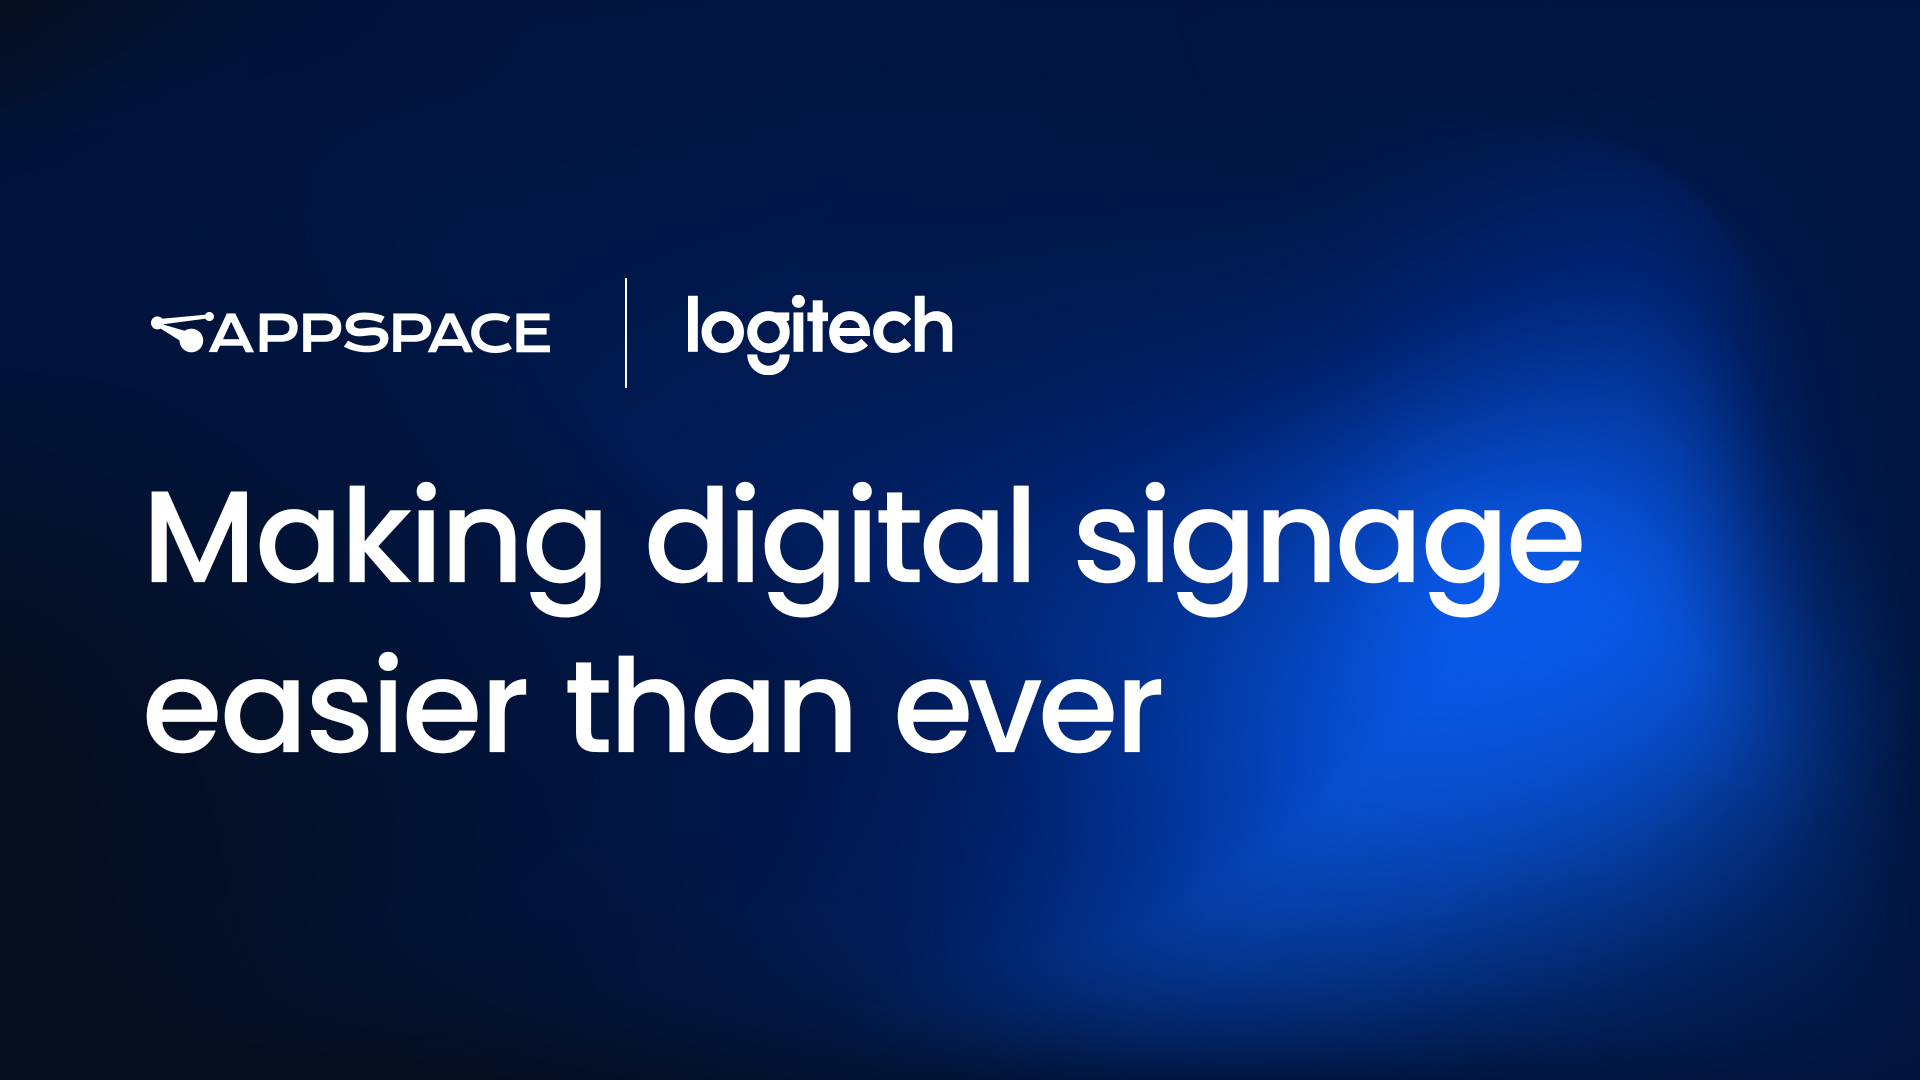 Appspace and Logitech Digital Signage